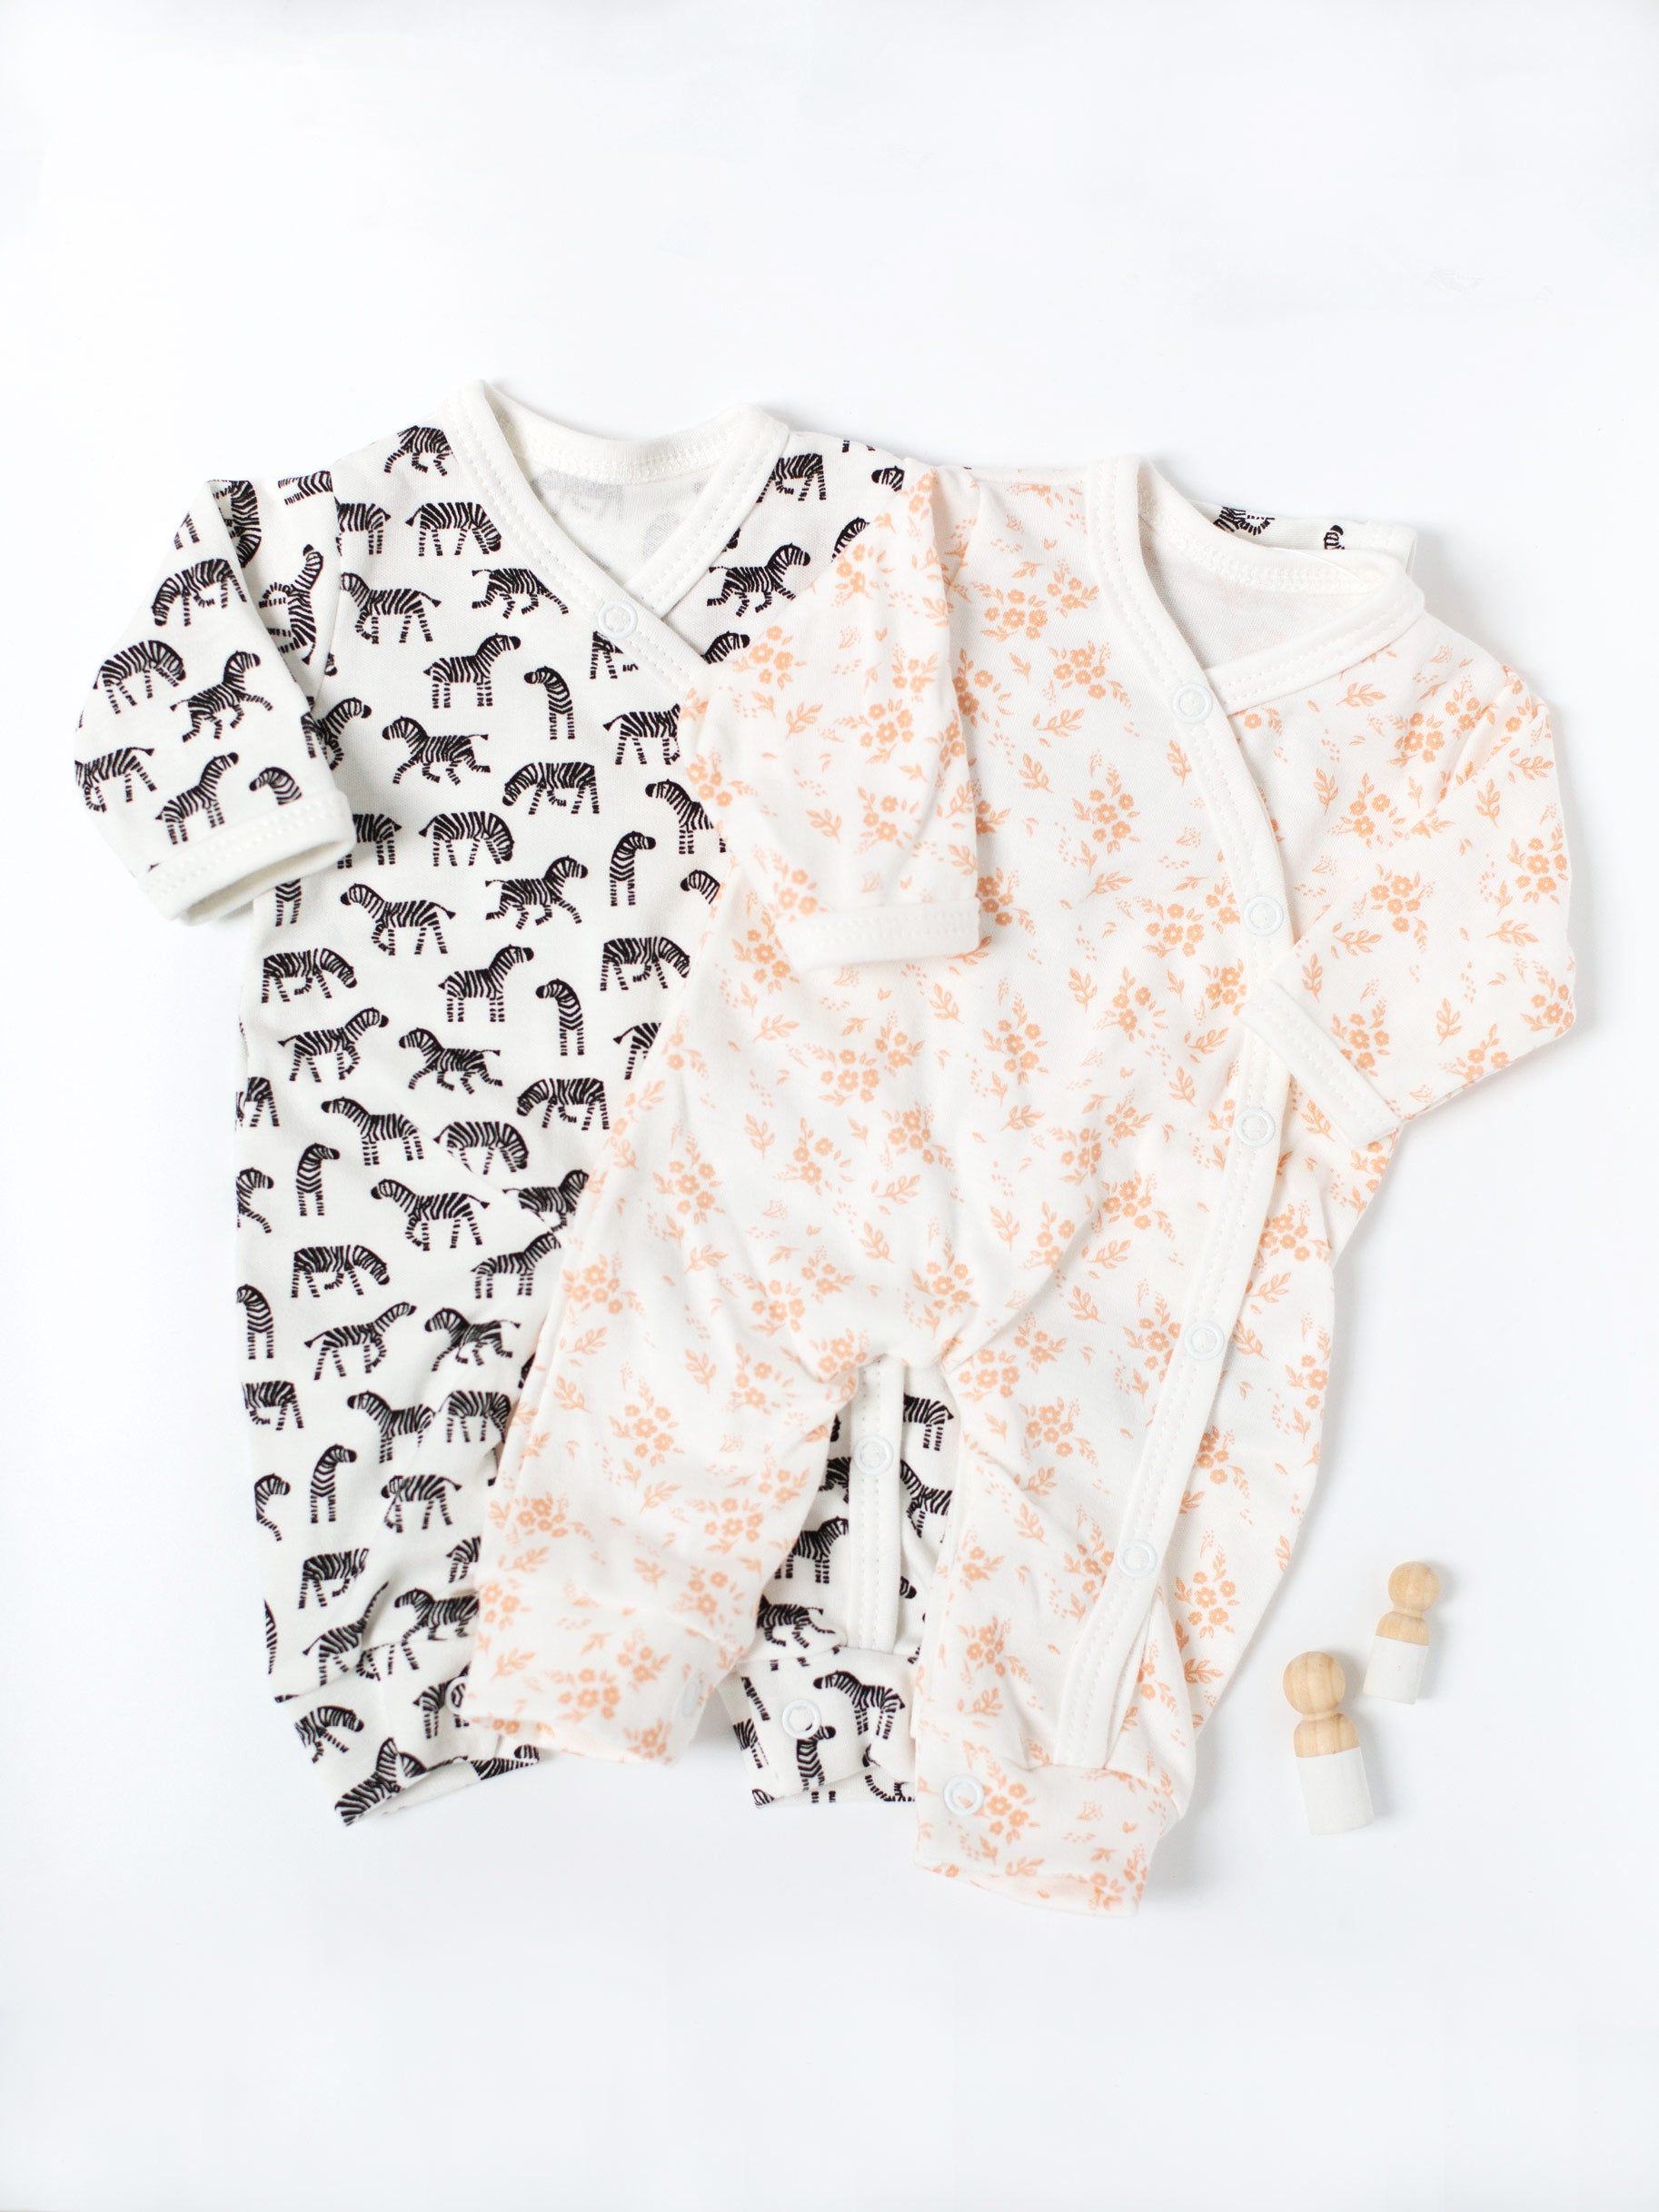 Twin Bundle - 2 Pack Sleepsuits, Little Zebras and Apricot Floral, 100% Organic Cotton - Set - Tiny & Small